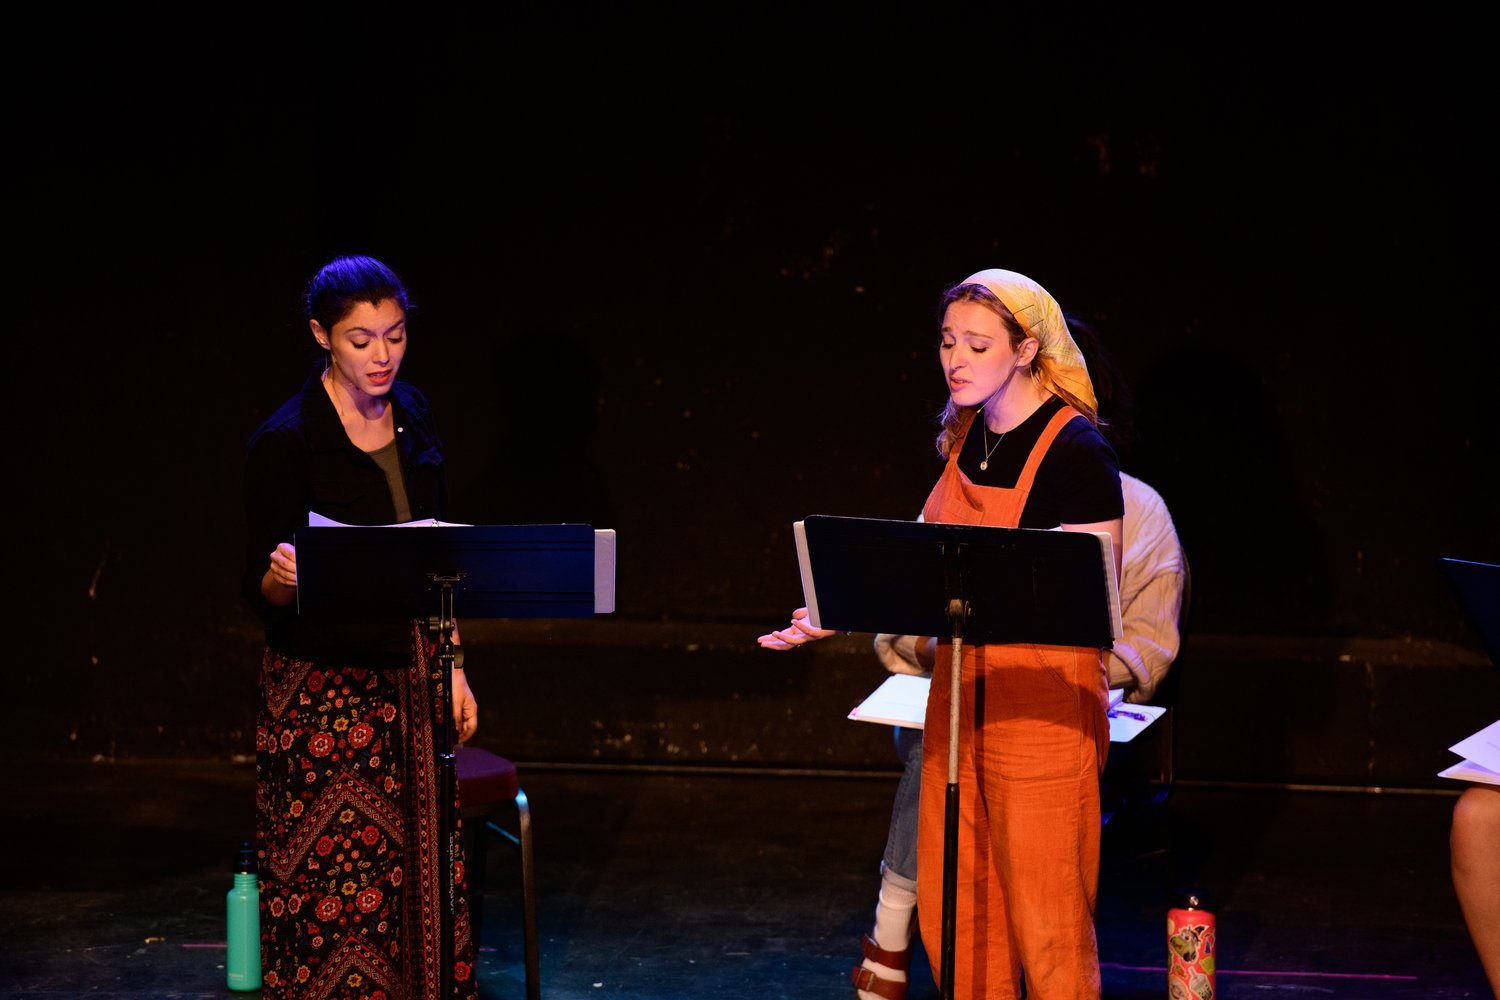   Brittany Martz &amp; Rita Castagna in the 2022 Workshop Reading at Fort Salem Theater (Photo by Michael Hatzel)  